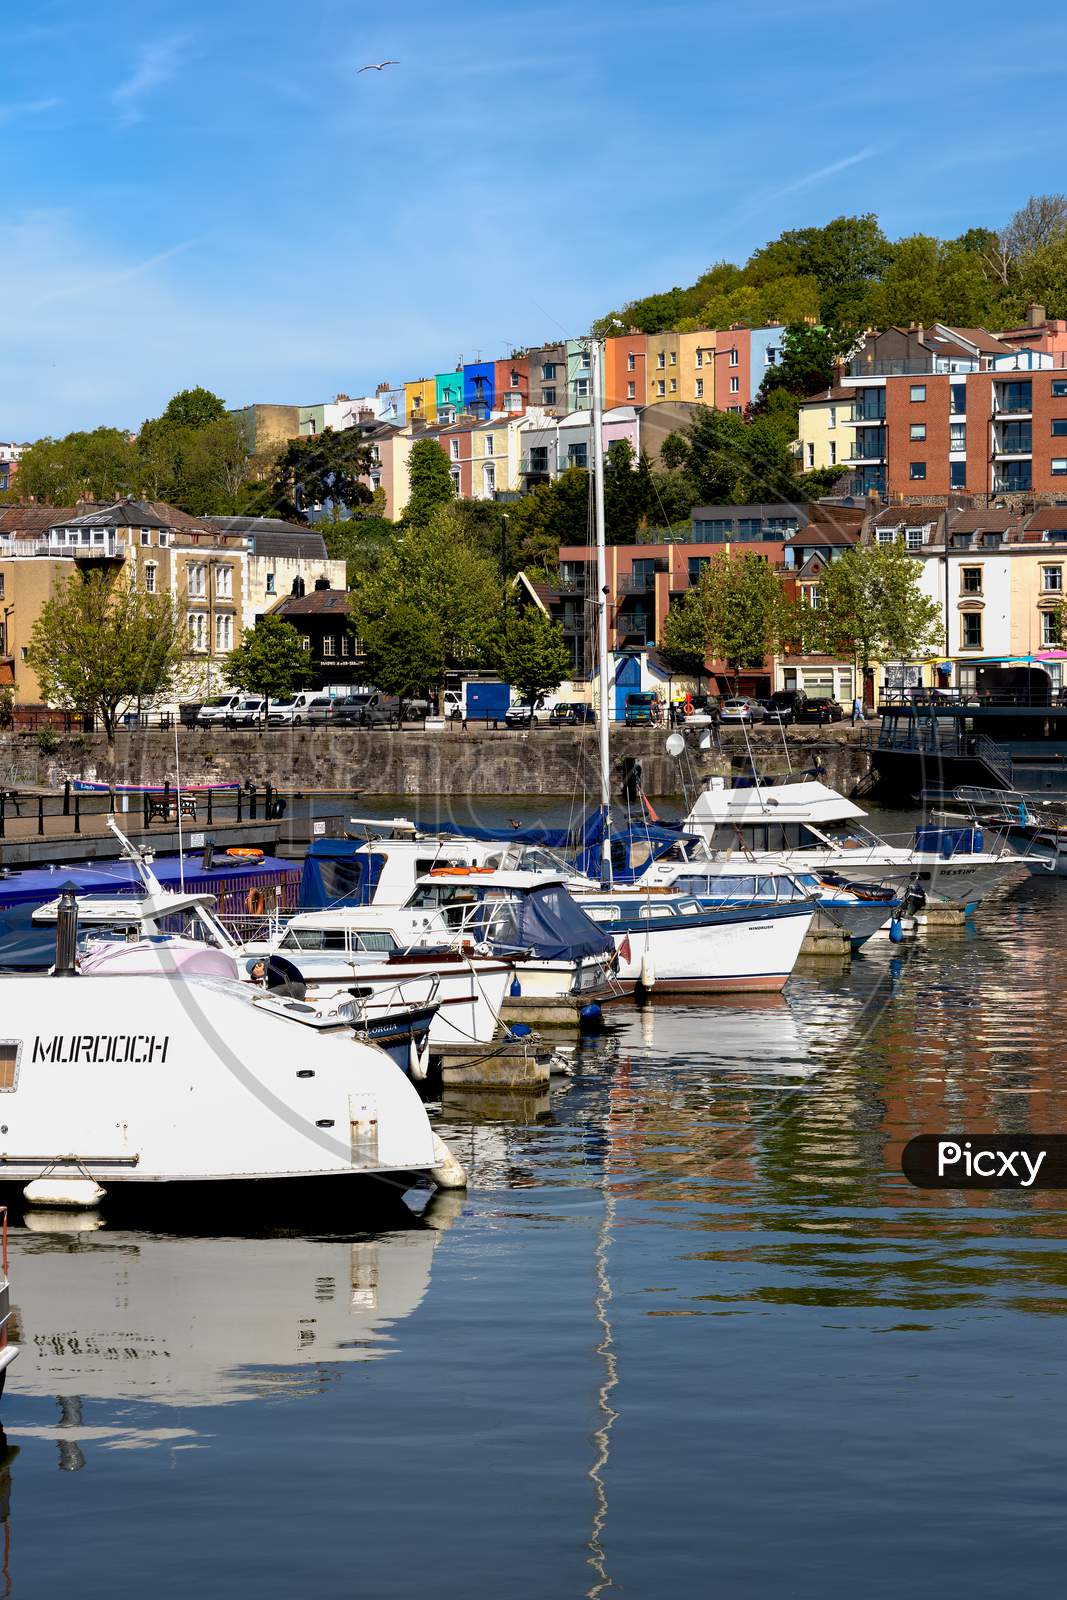 Bristol, Uk - May 14 : View Of Boats And Colourful Apartments Along The River Avon In Bristol On May 14, 2019. Three Unidentified People